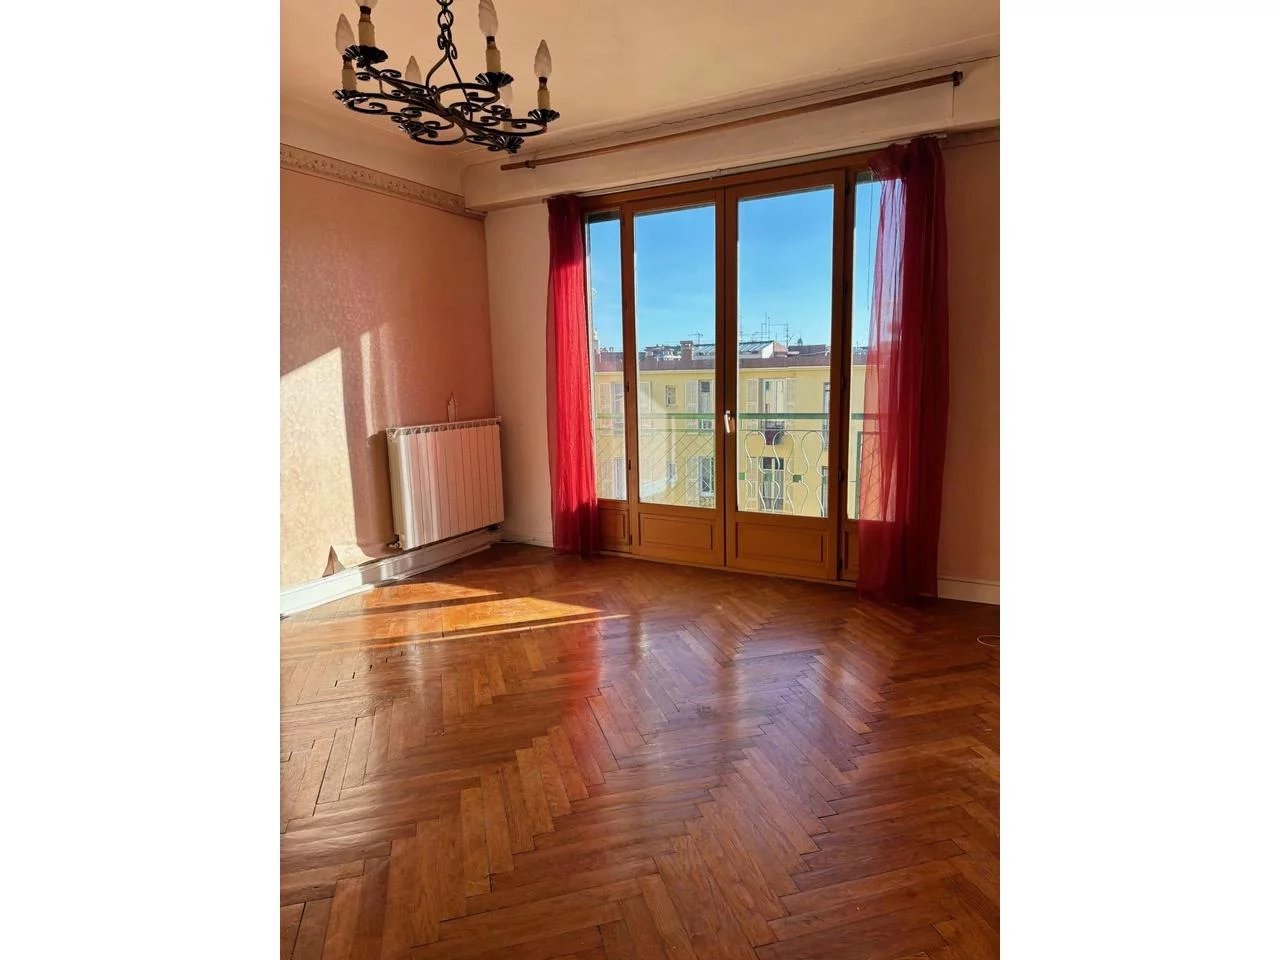 Appartement  2 Rooms 55.4m2  for sale   259 000 €